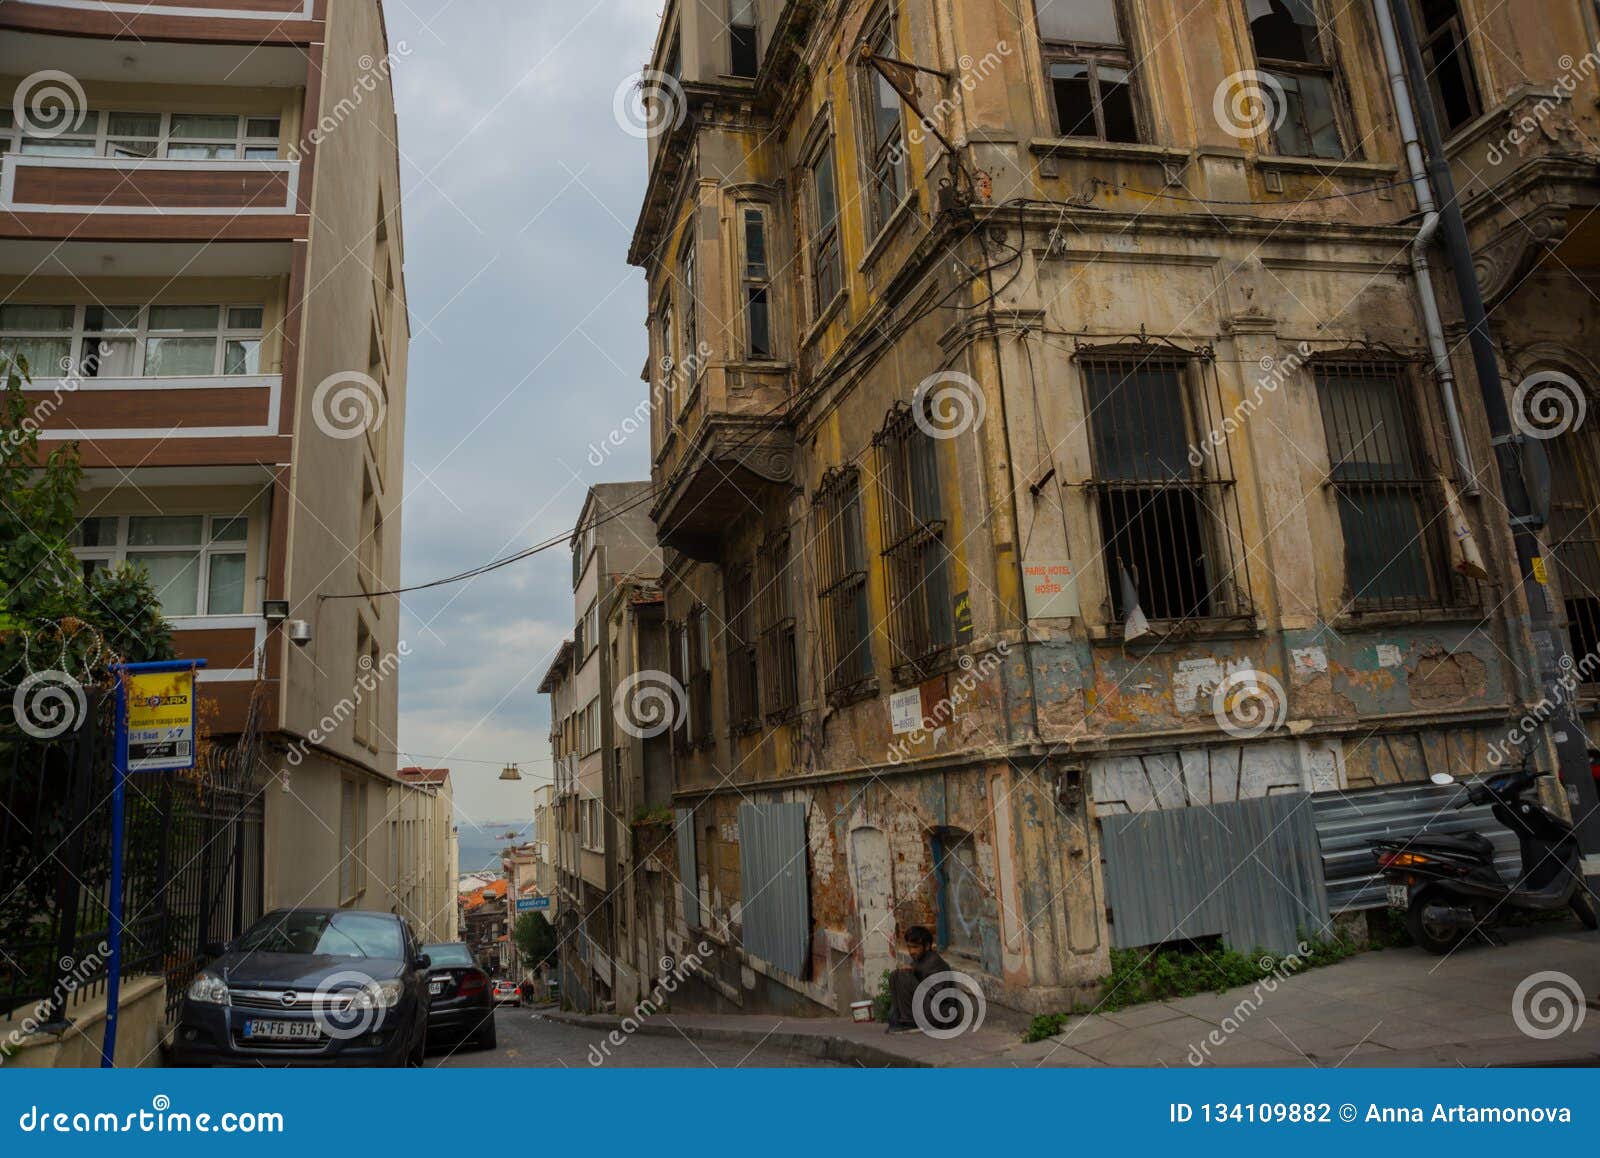 Istanbul, Turkey Street View from Balat District, the Oldest Neighborhoods in Istanbul with Interesting Architectural Style and Editorial Photography  photo image